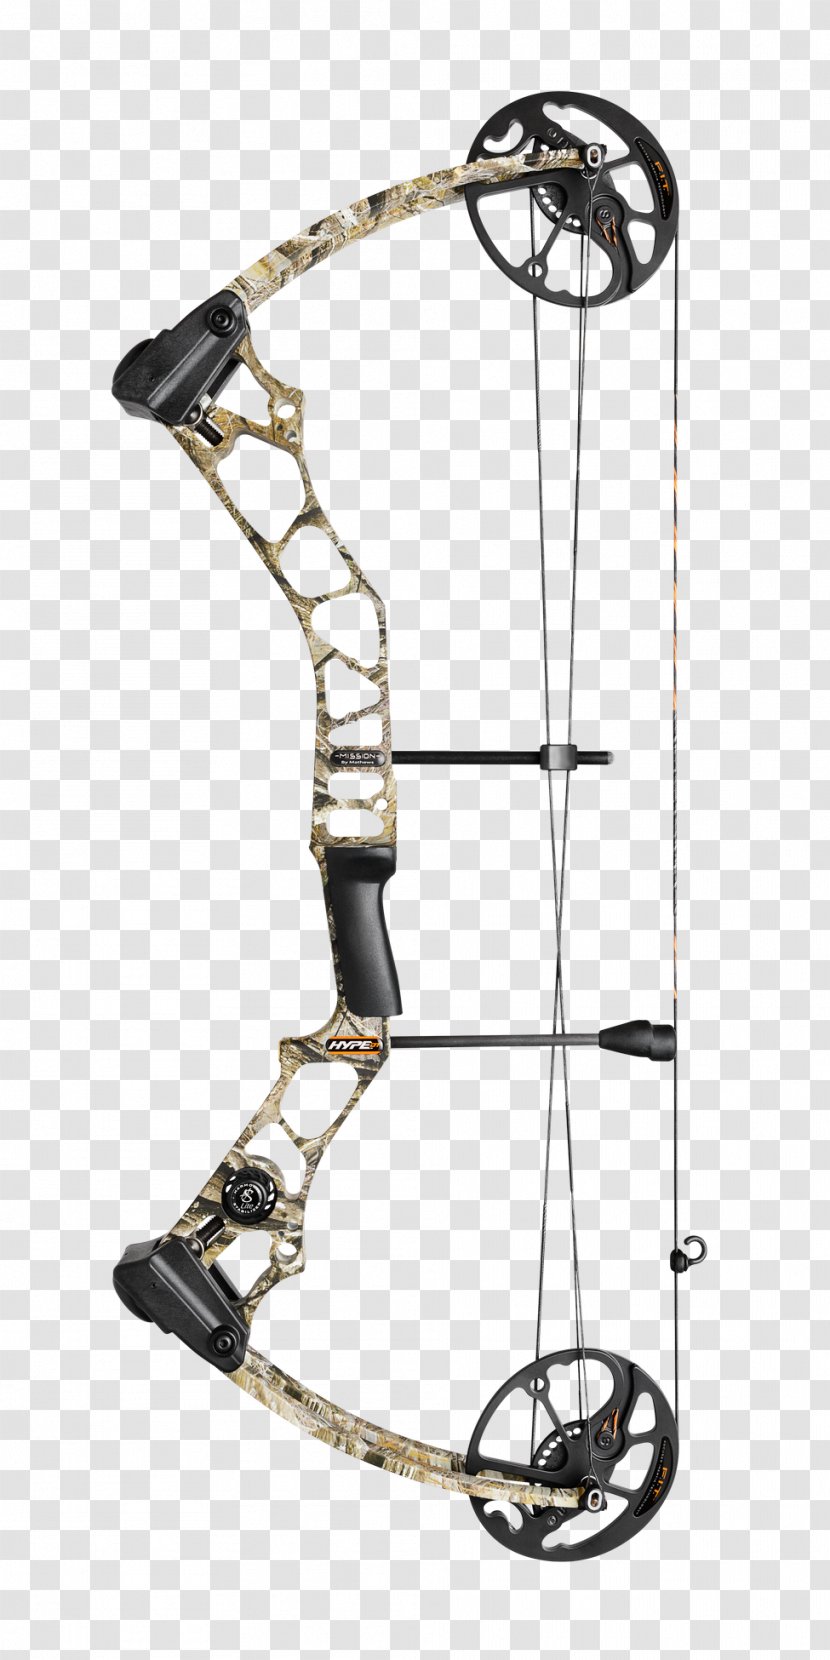 Compound Bows Archery Bow And Arrow Bowhunting - Introduced Transparent PNG